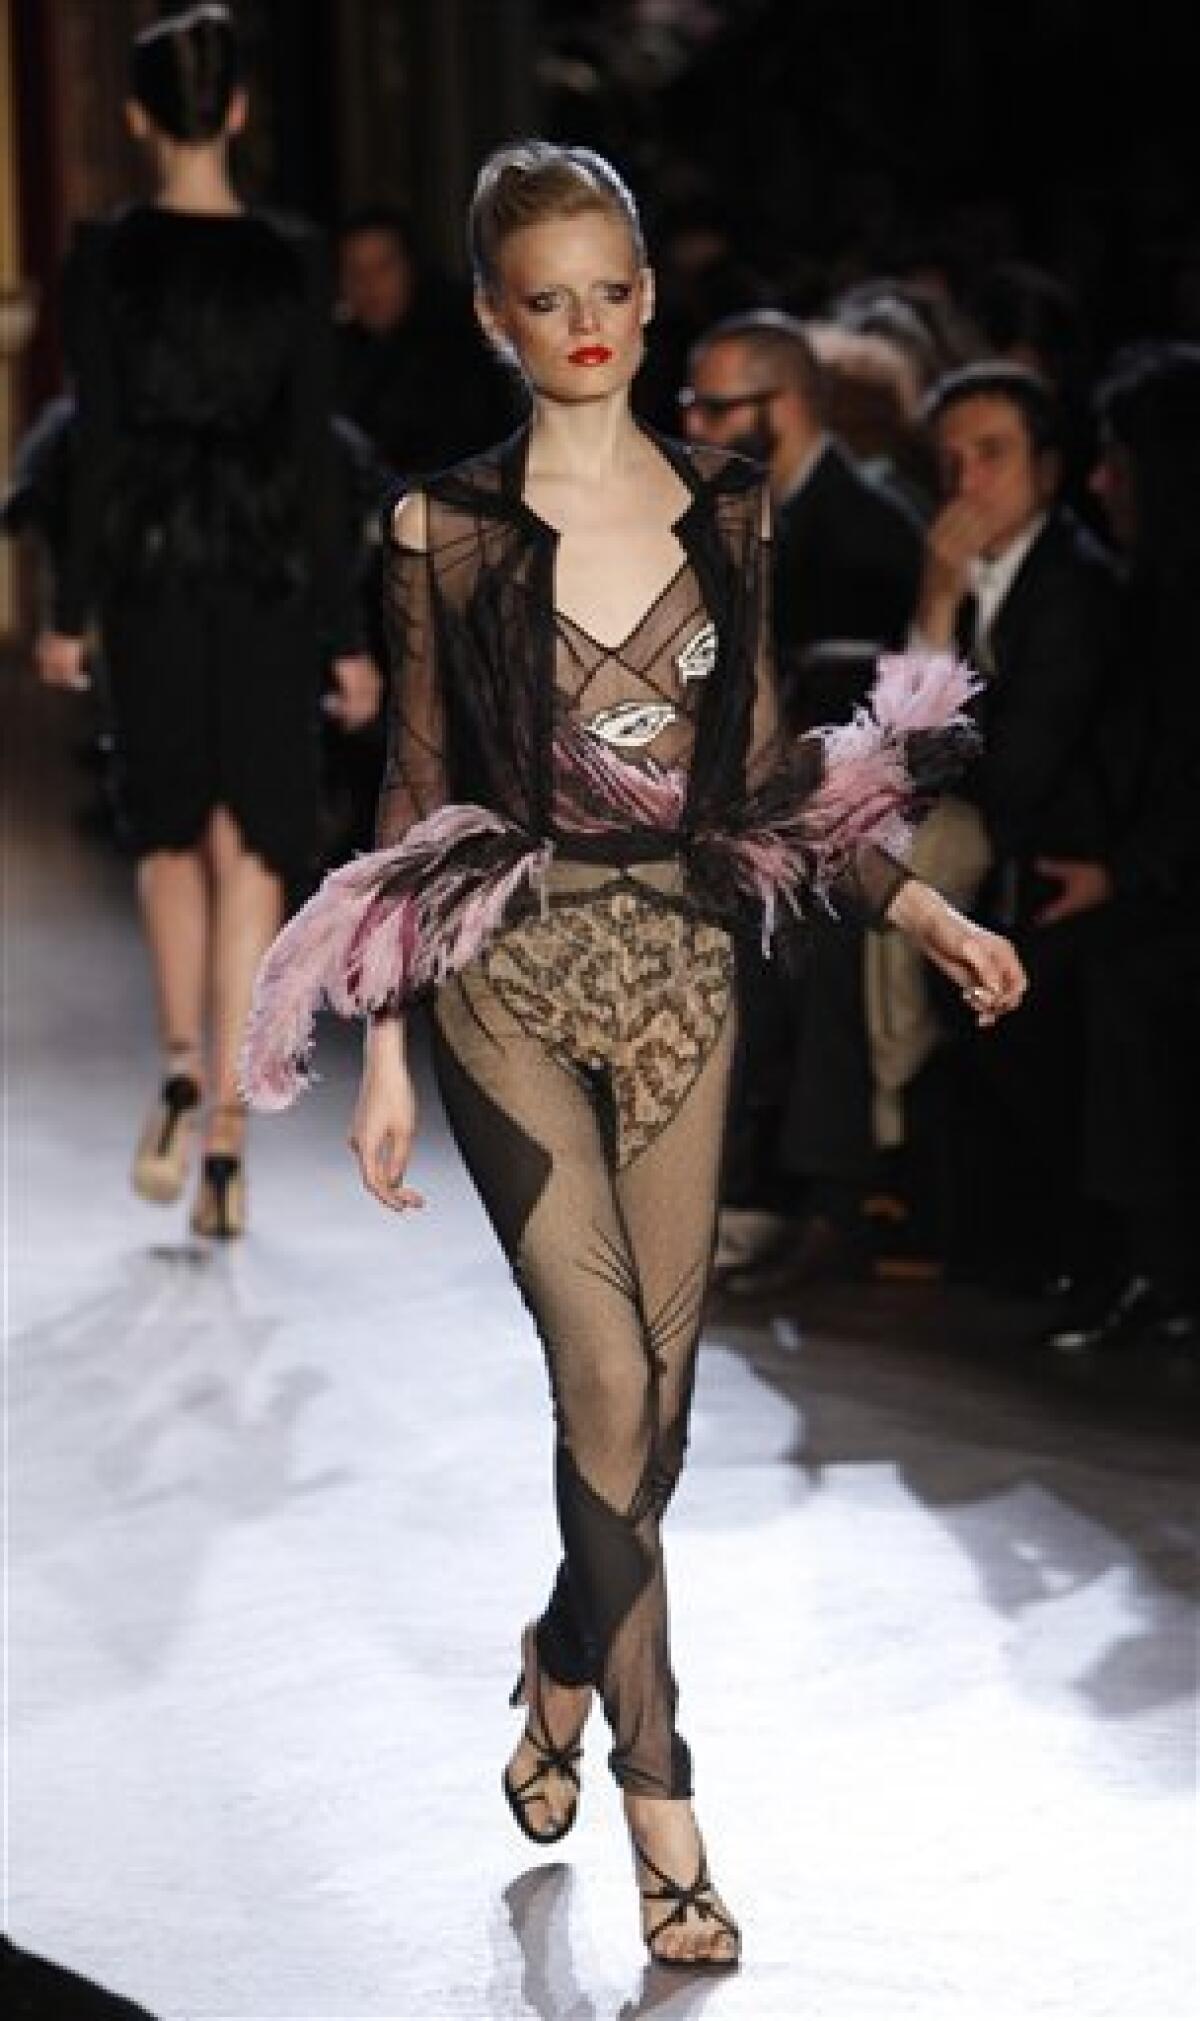 Model Carmen Kass on the runway at the Lanvin fashion show during